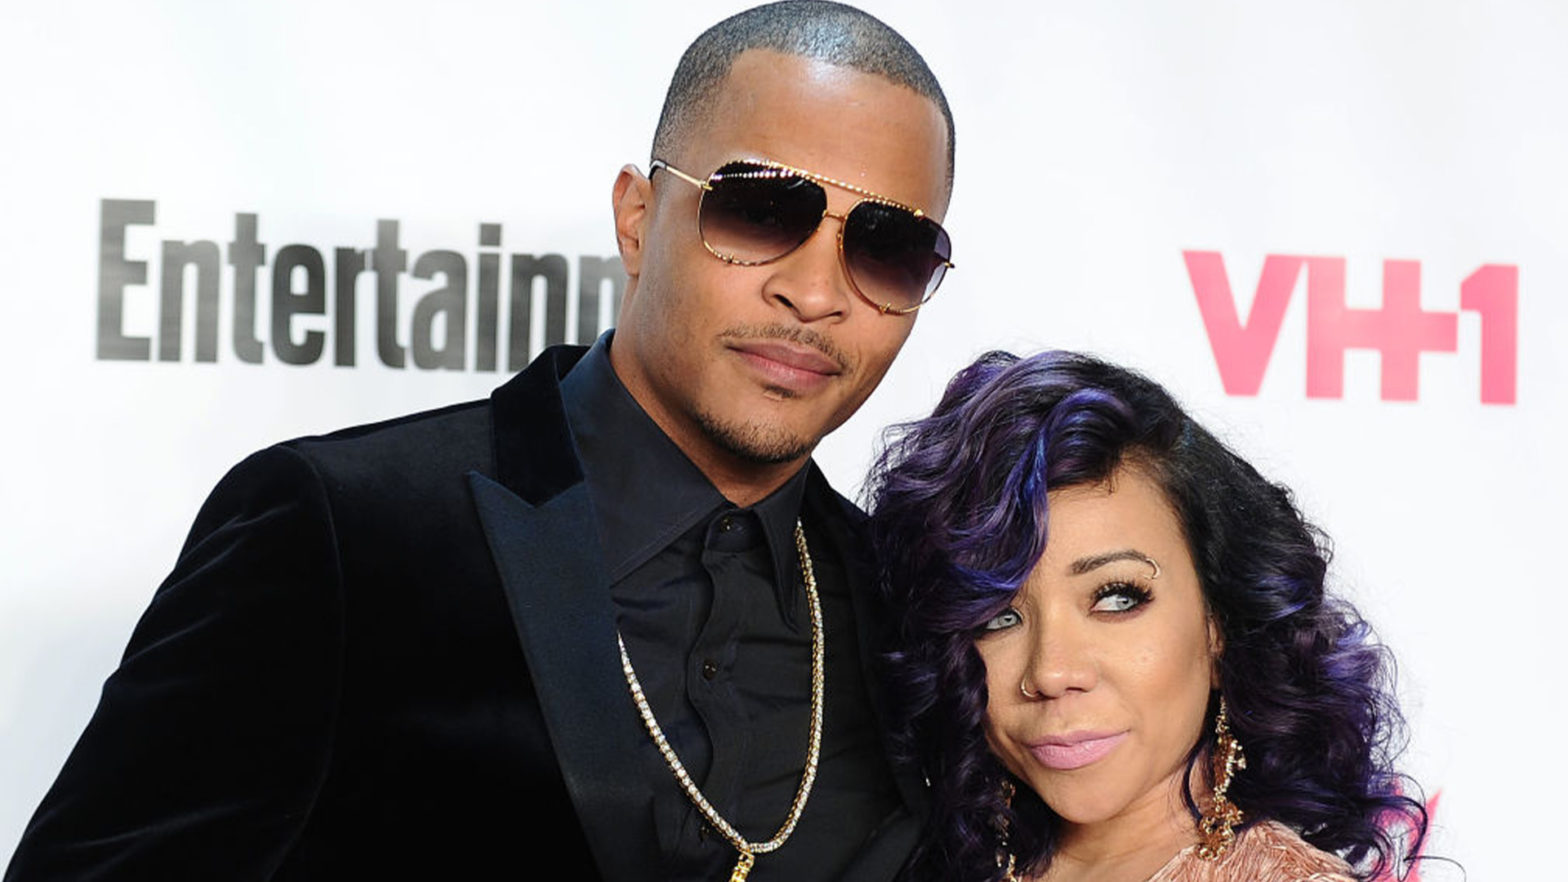 T.I. And Tiny's Copyright Infringement Case Against Toy Company Ends In A Mistrial